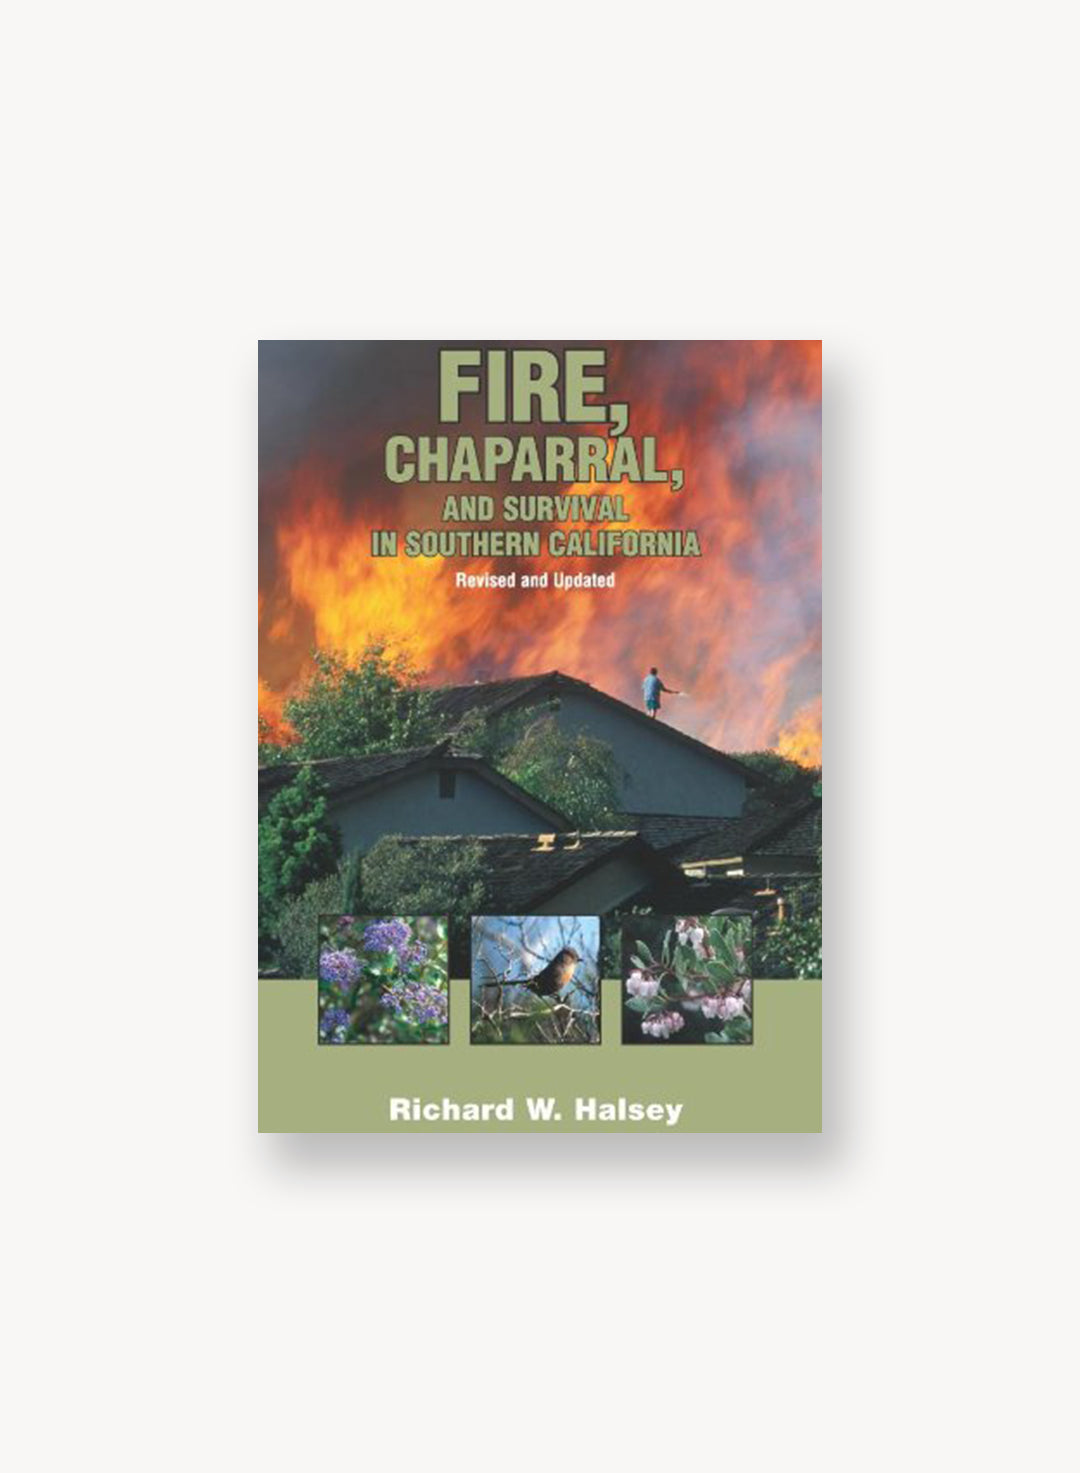 Fire, Chaparral, and Survival in Southern California